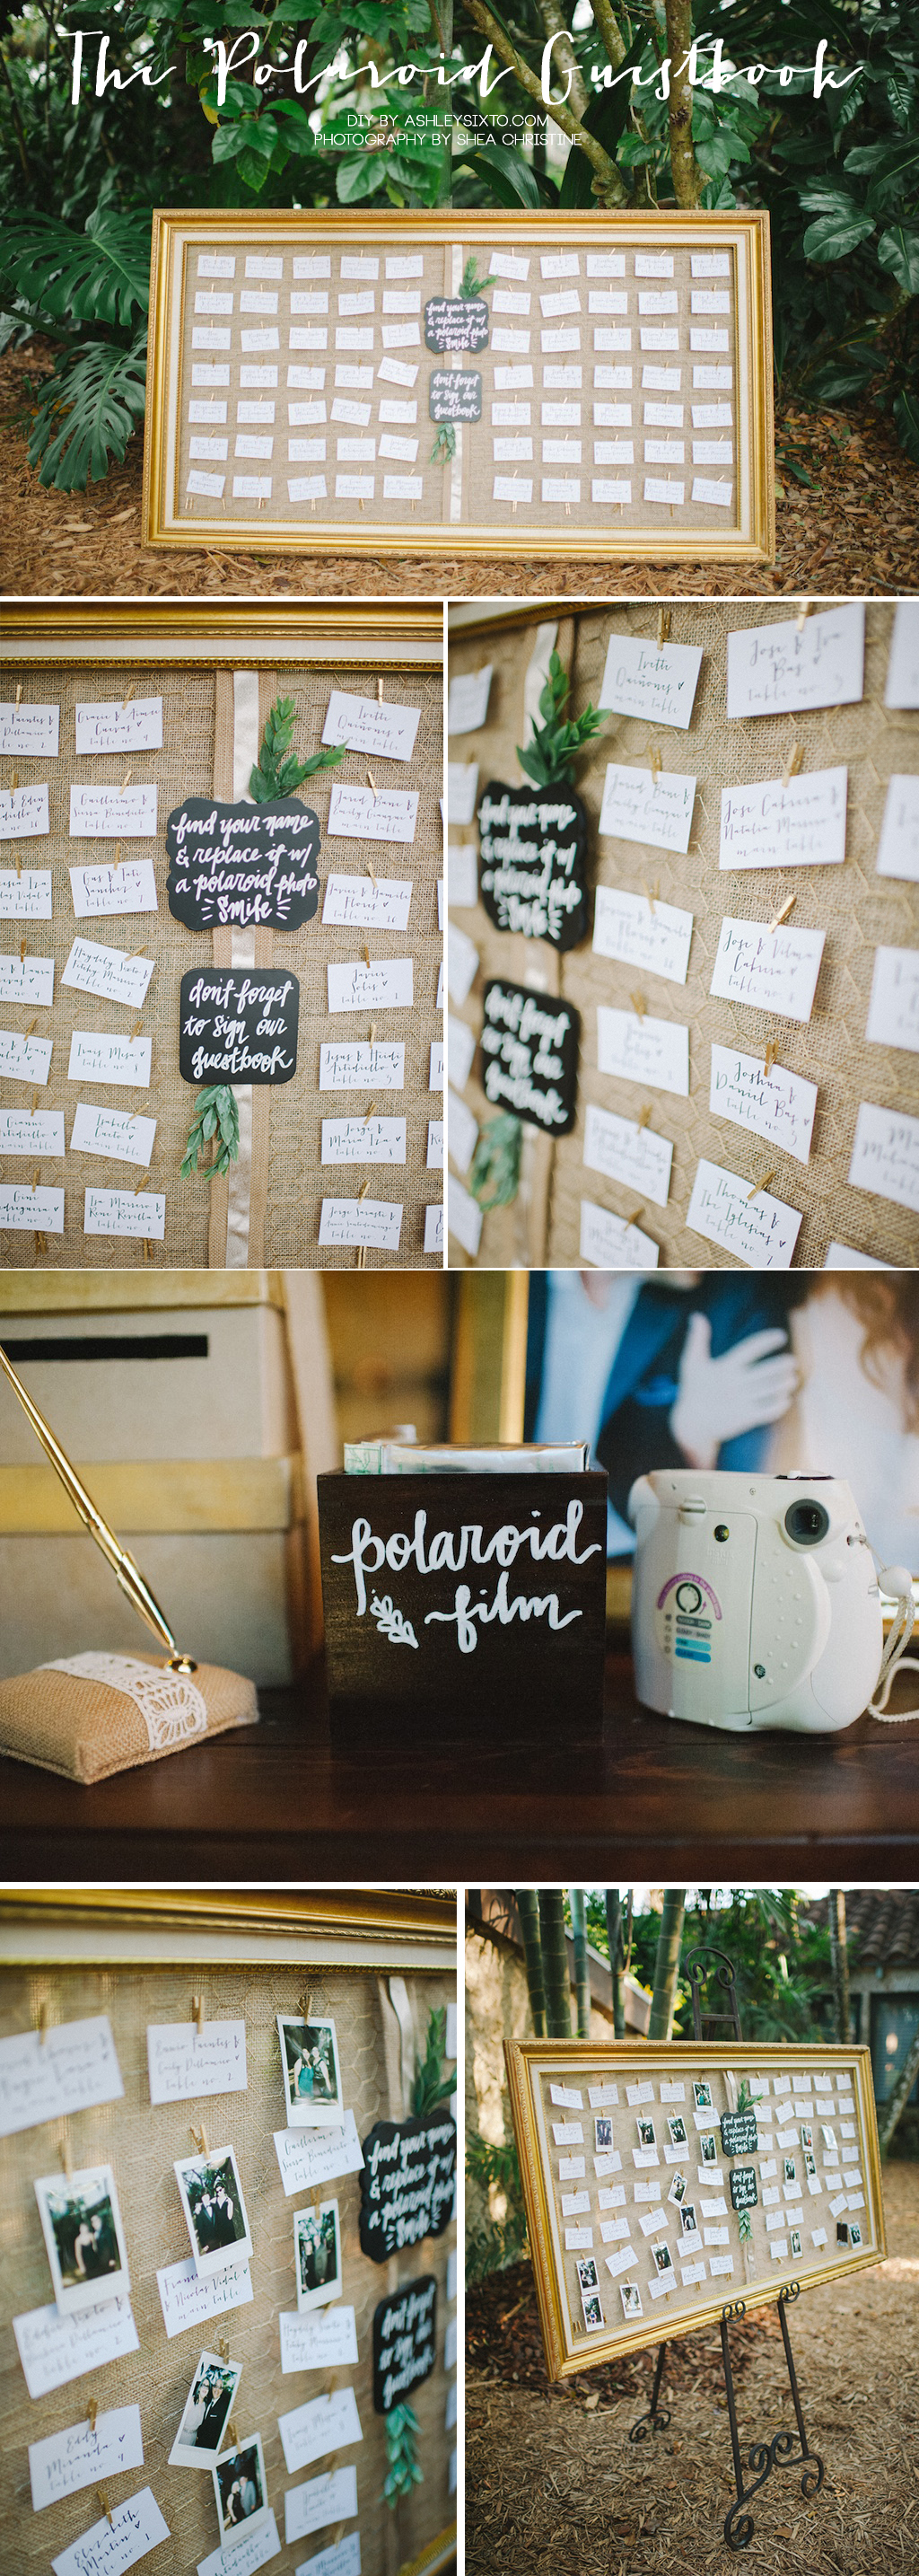 Details_The Polaroid Guestbook